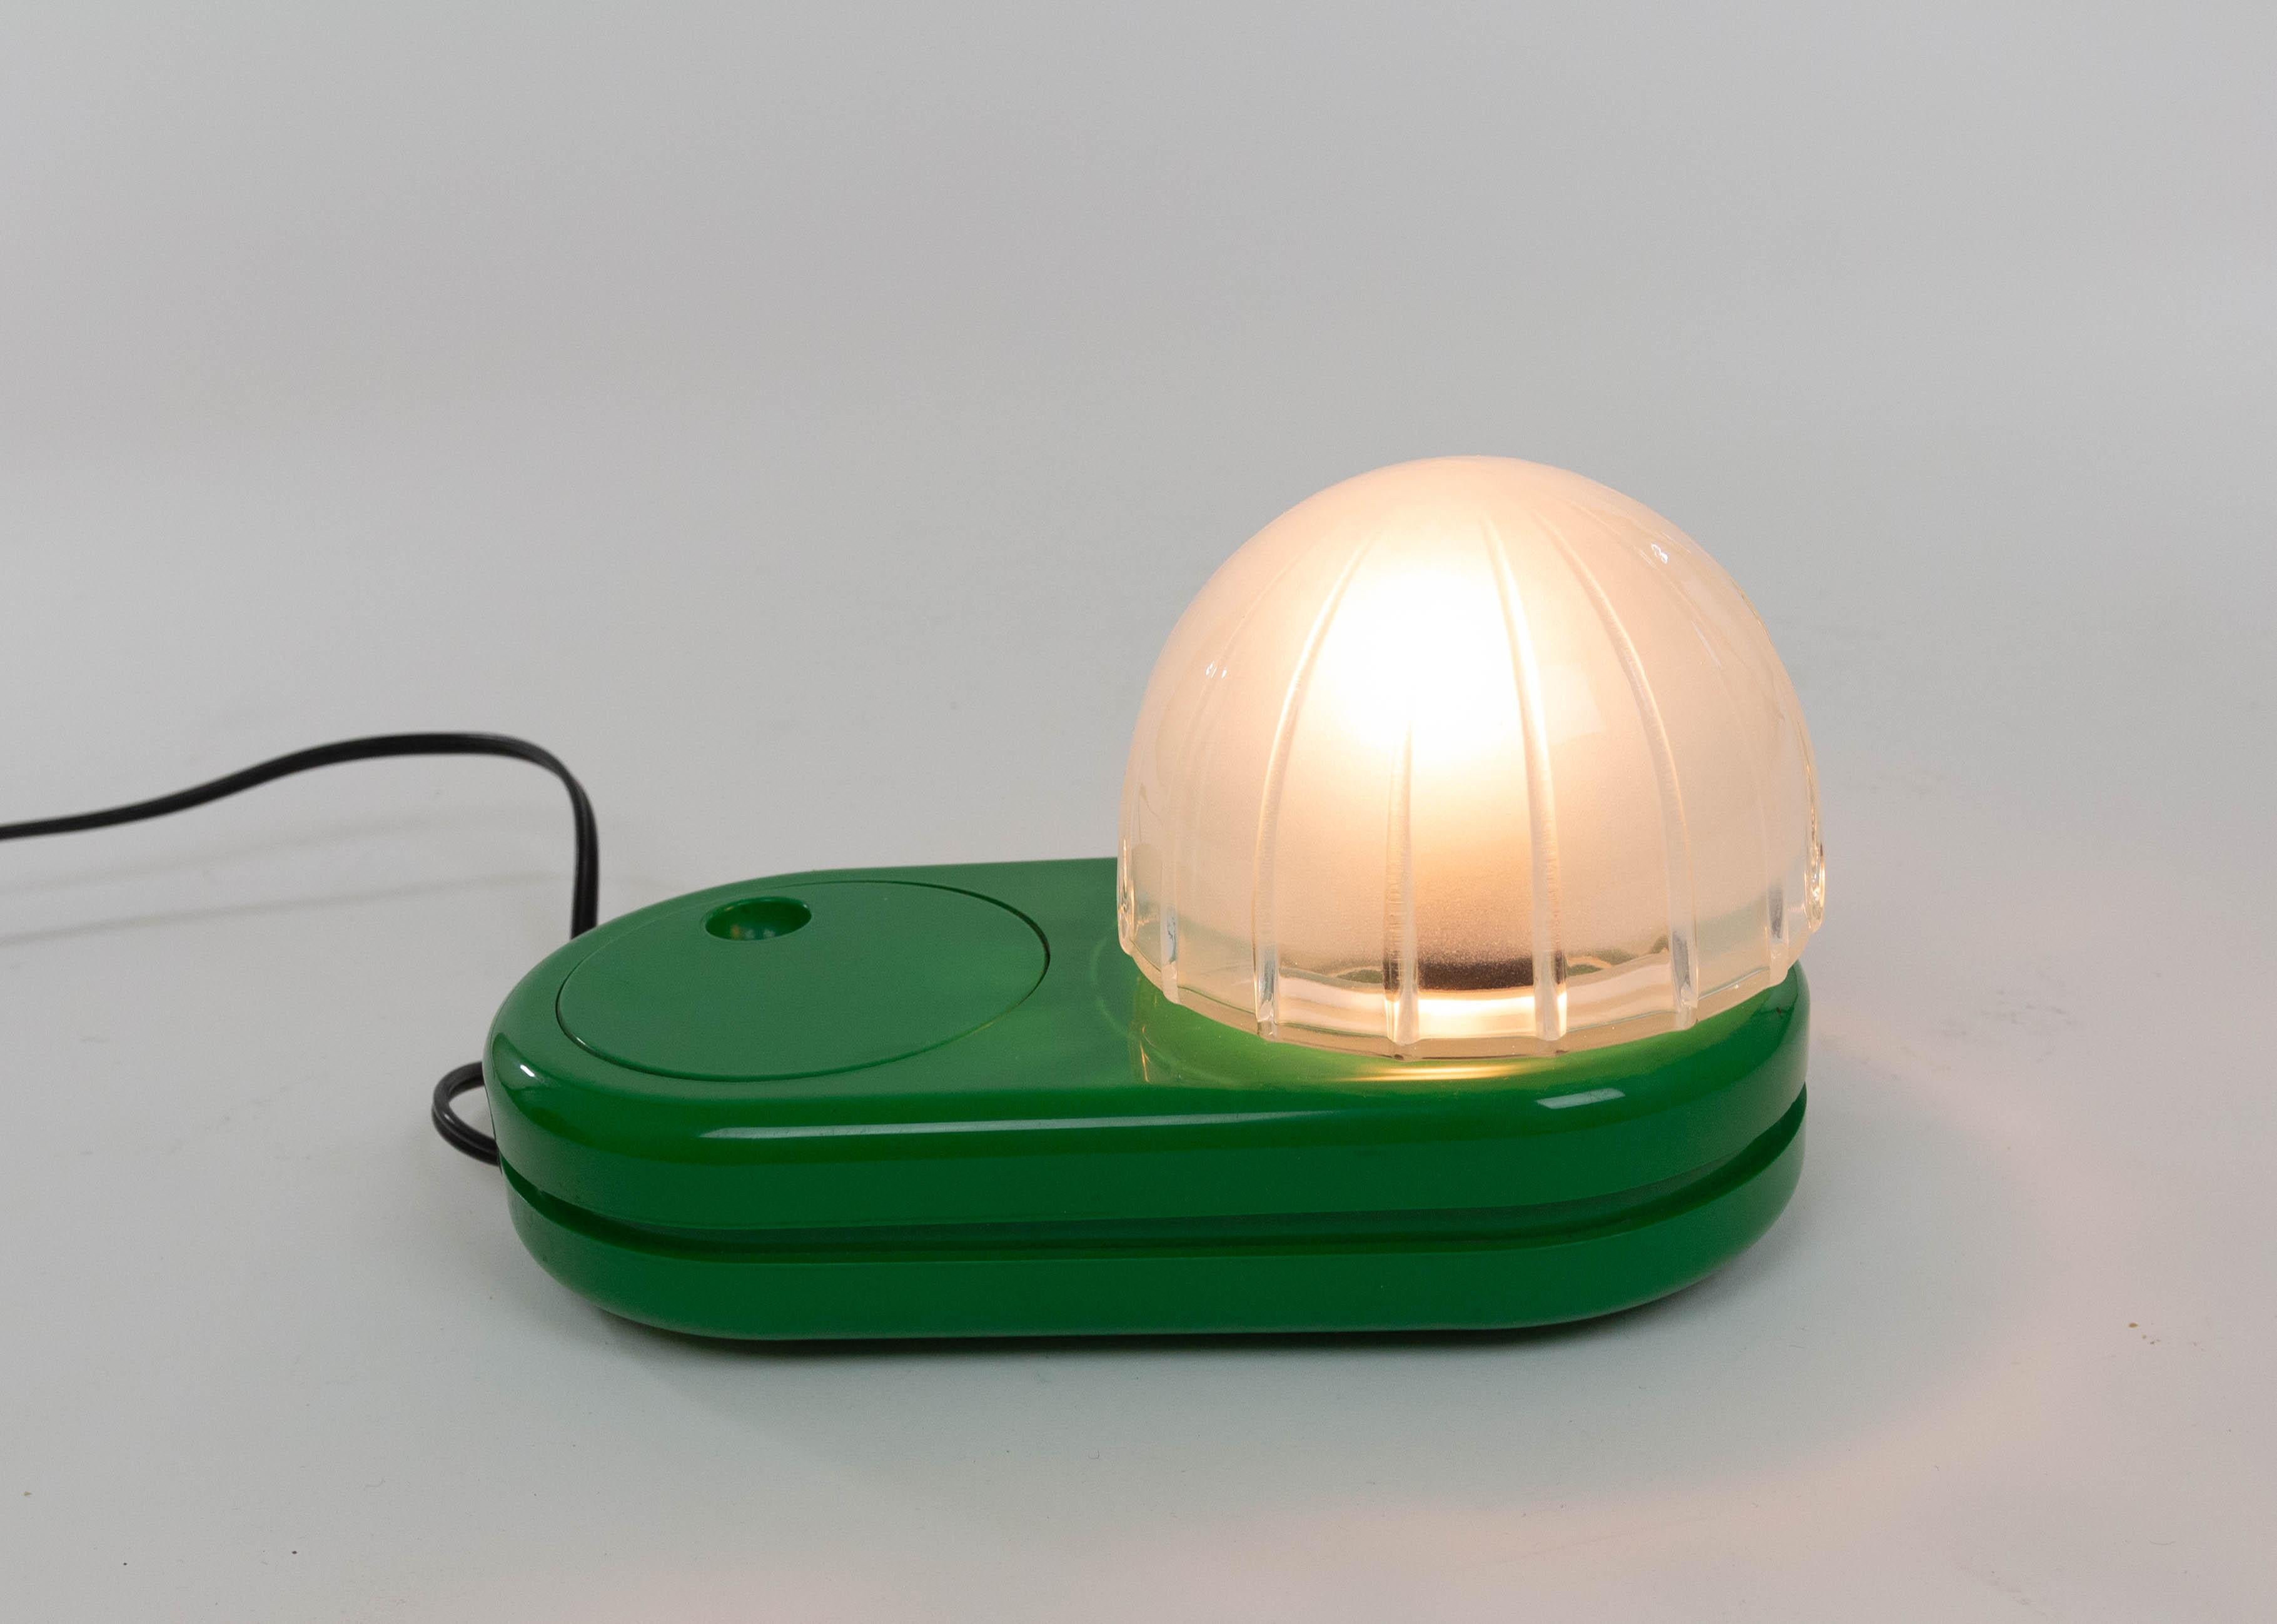 Green Farstar table lamp designed by Adalberto Dal Lago (1973) and manufactured by Francesconi.

The dome shaped glass shade sits on a plastic base. The large round light dimmer that also functions as an on / off switch is a characteristic feature